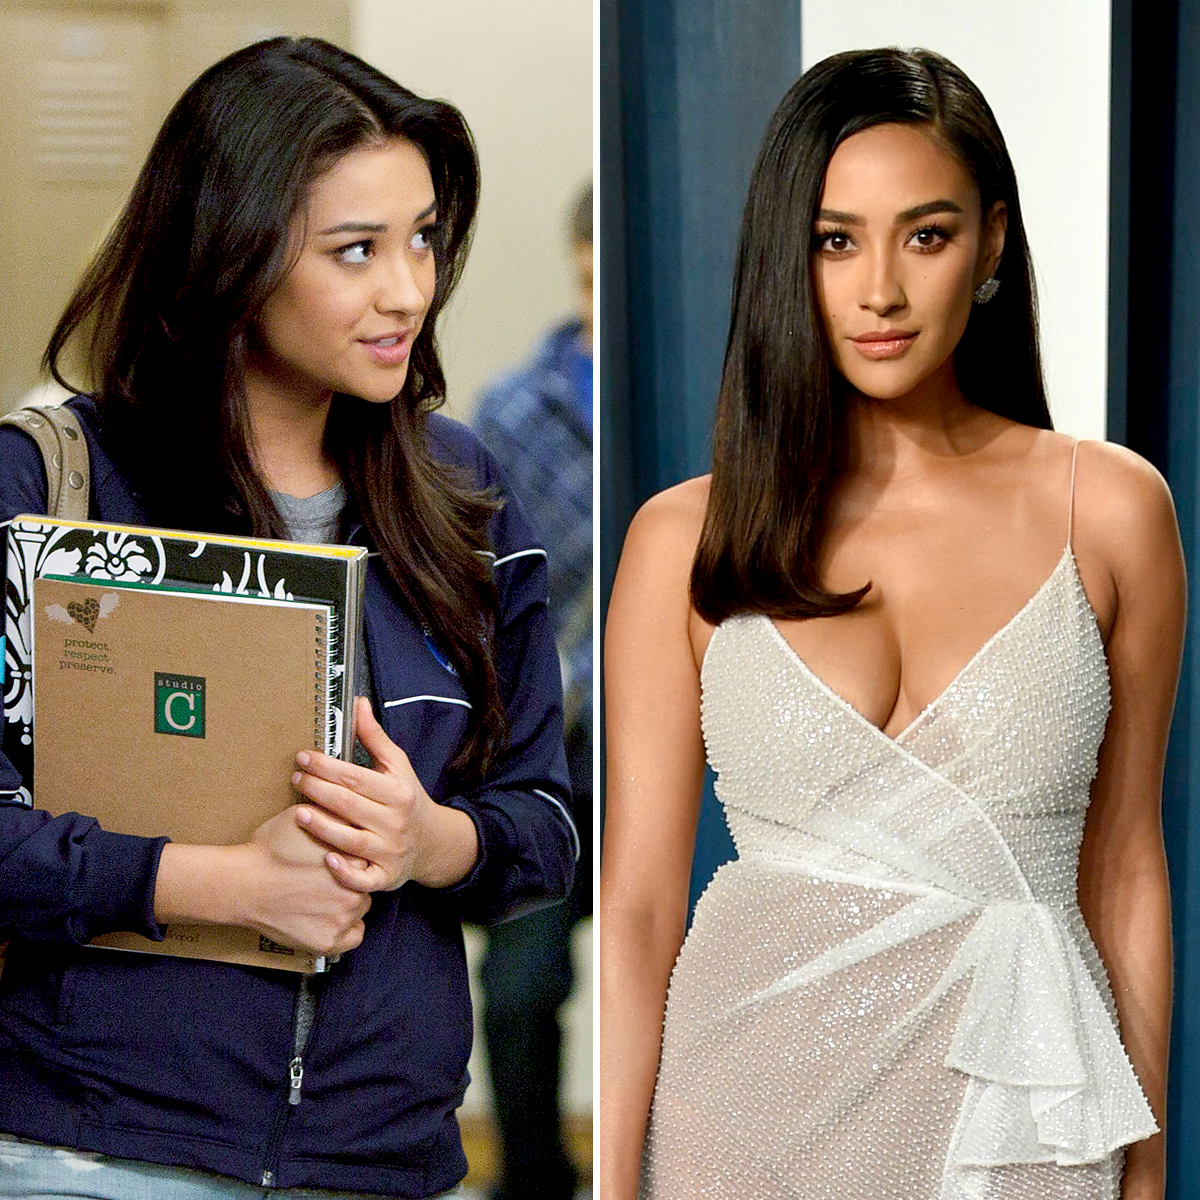 Pretty Little Liars' Cast: Where Are They Now?